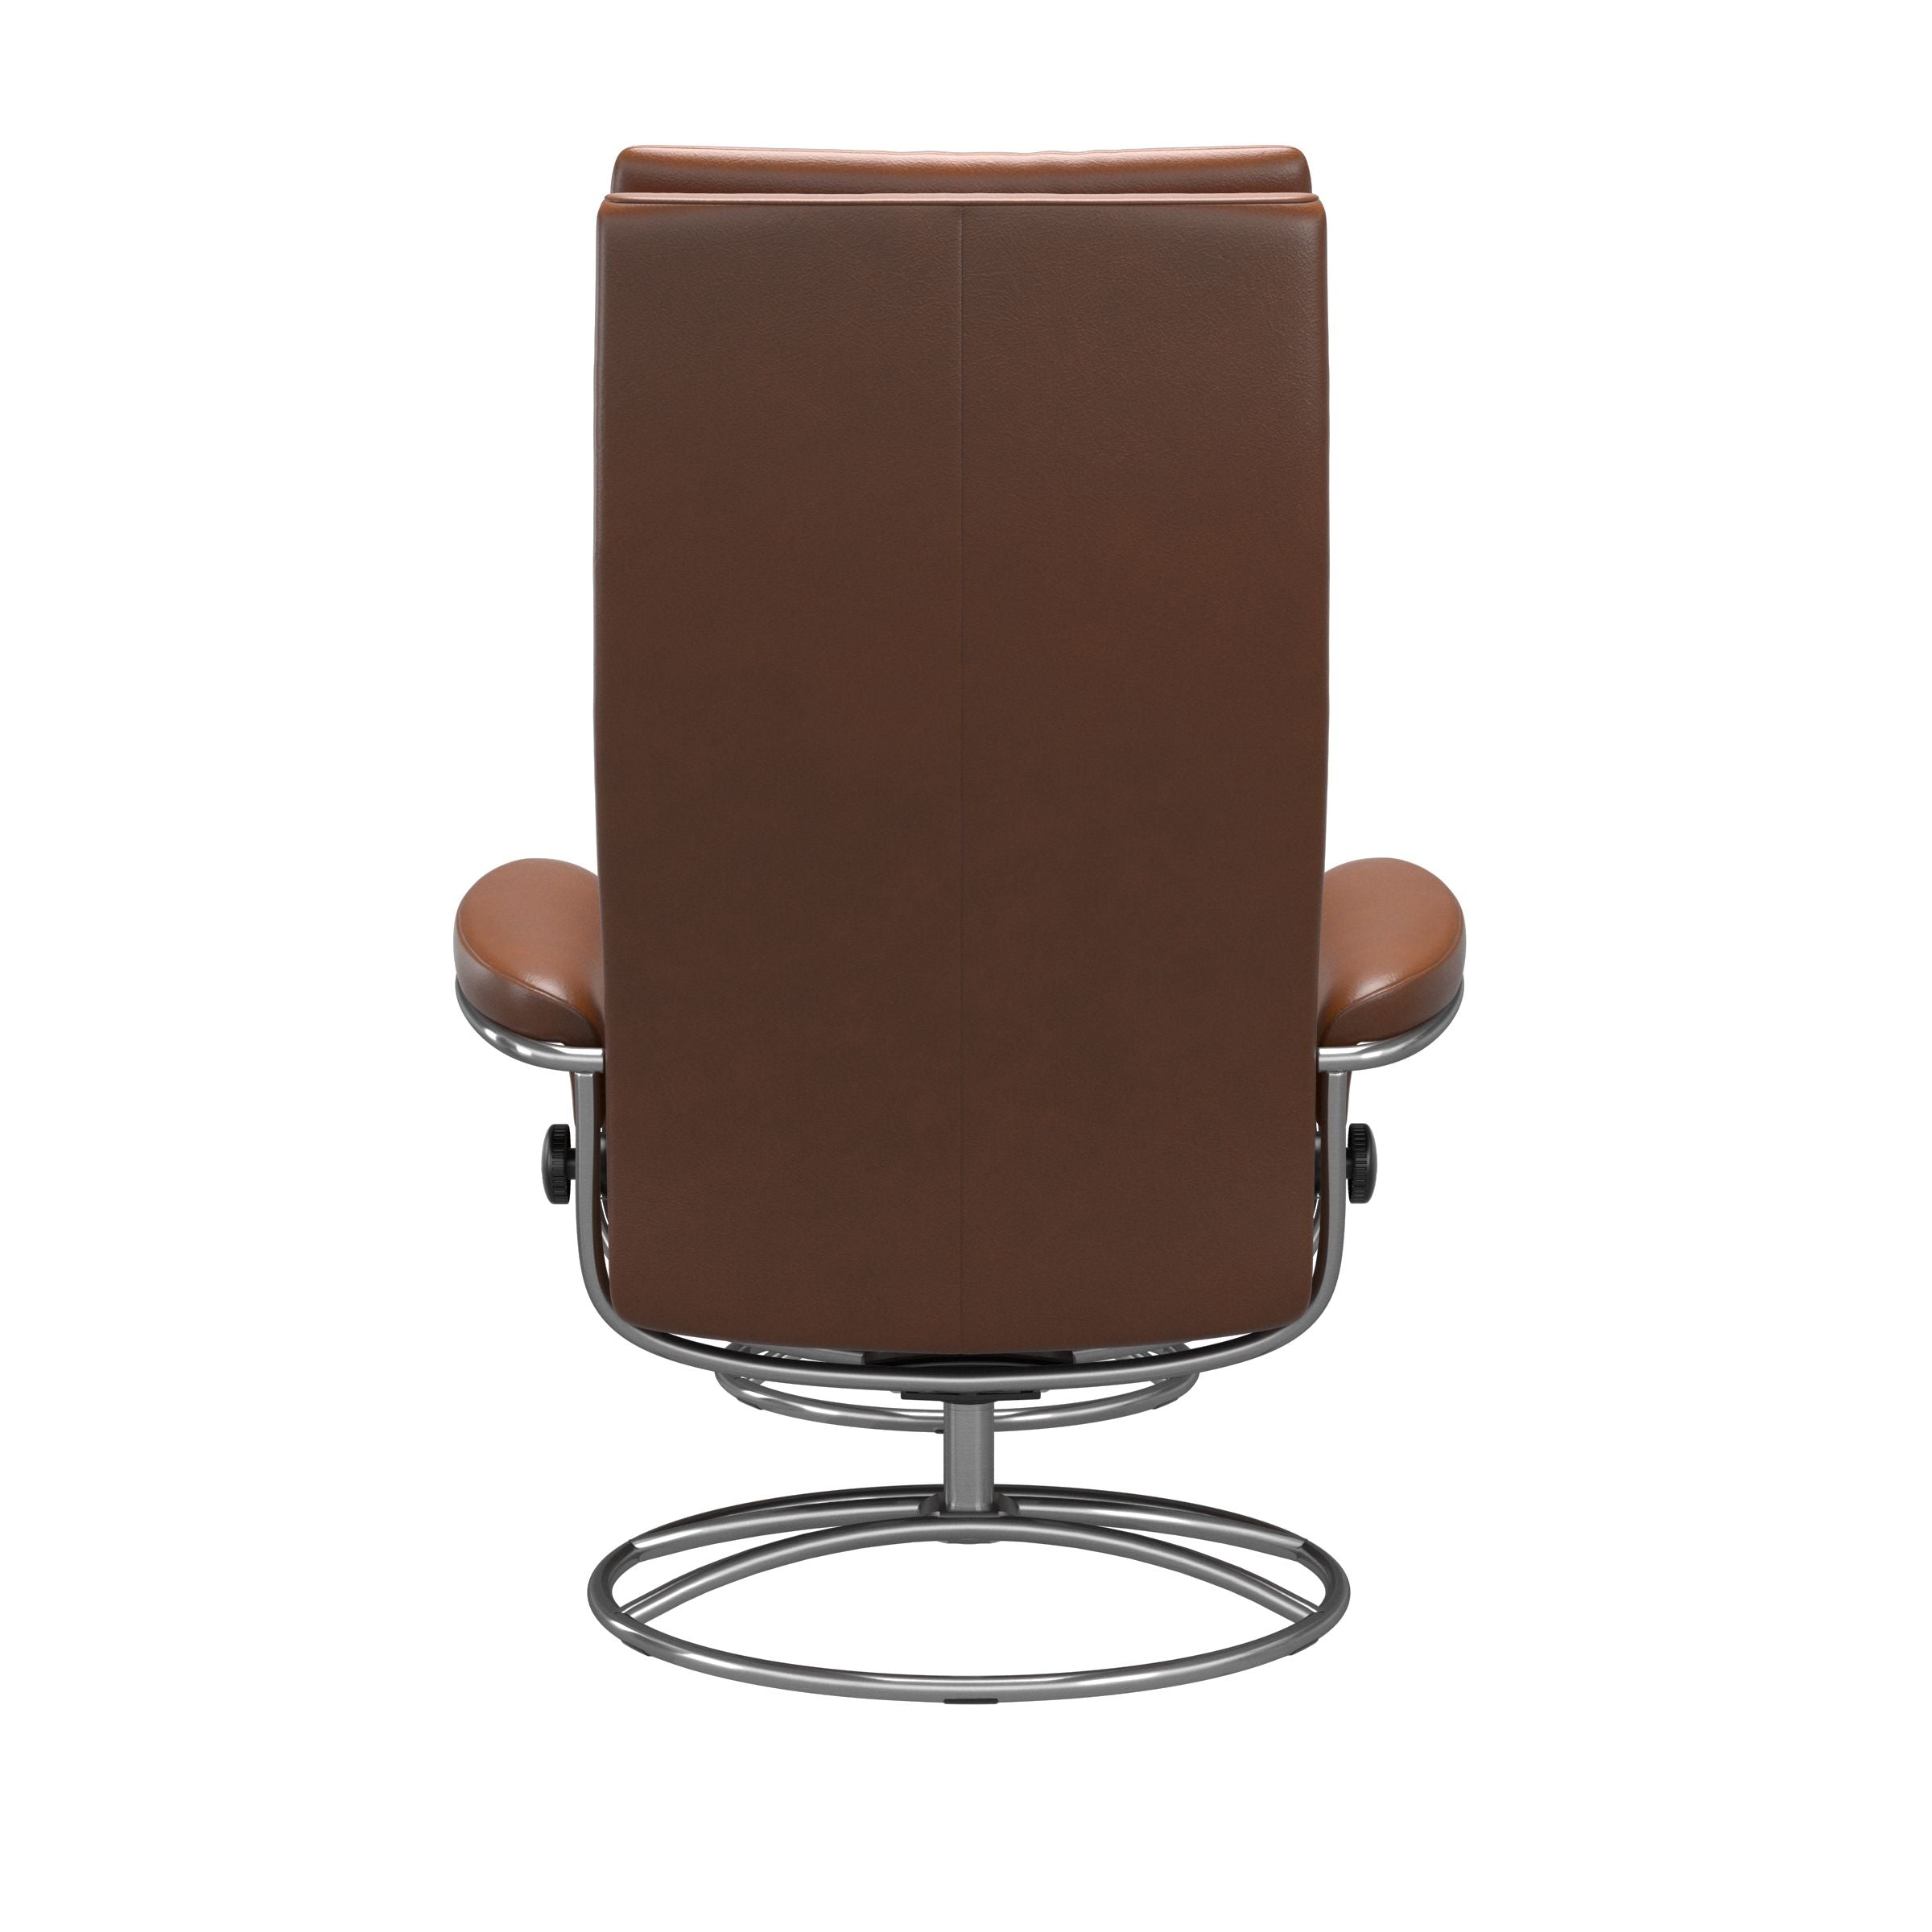 Stressless Tokyo Original High Back Leather Chair with Footstool